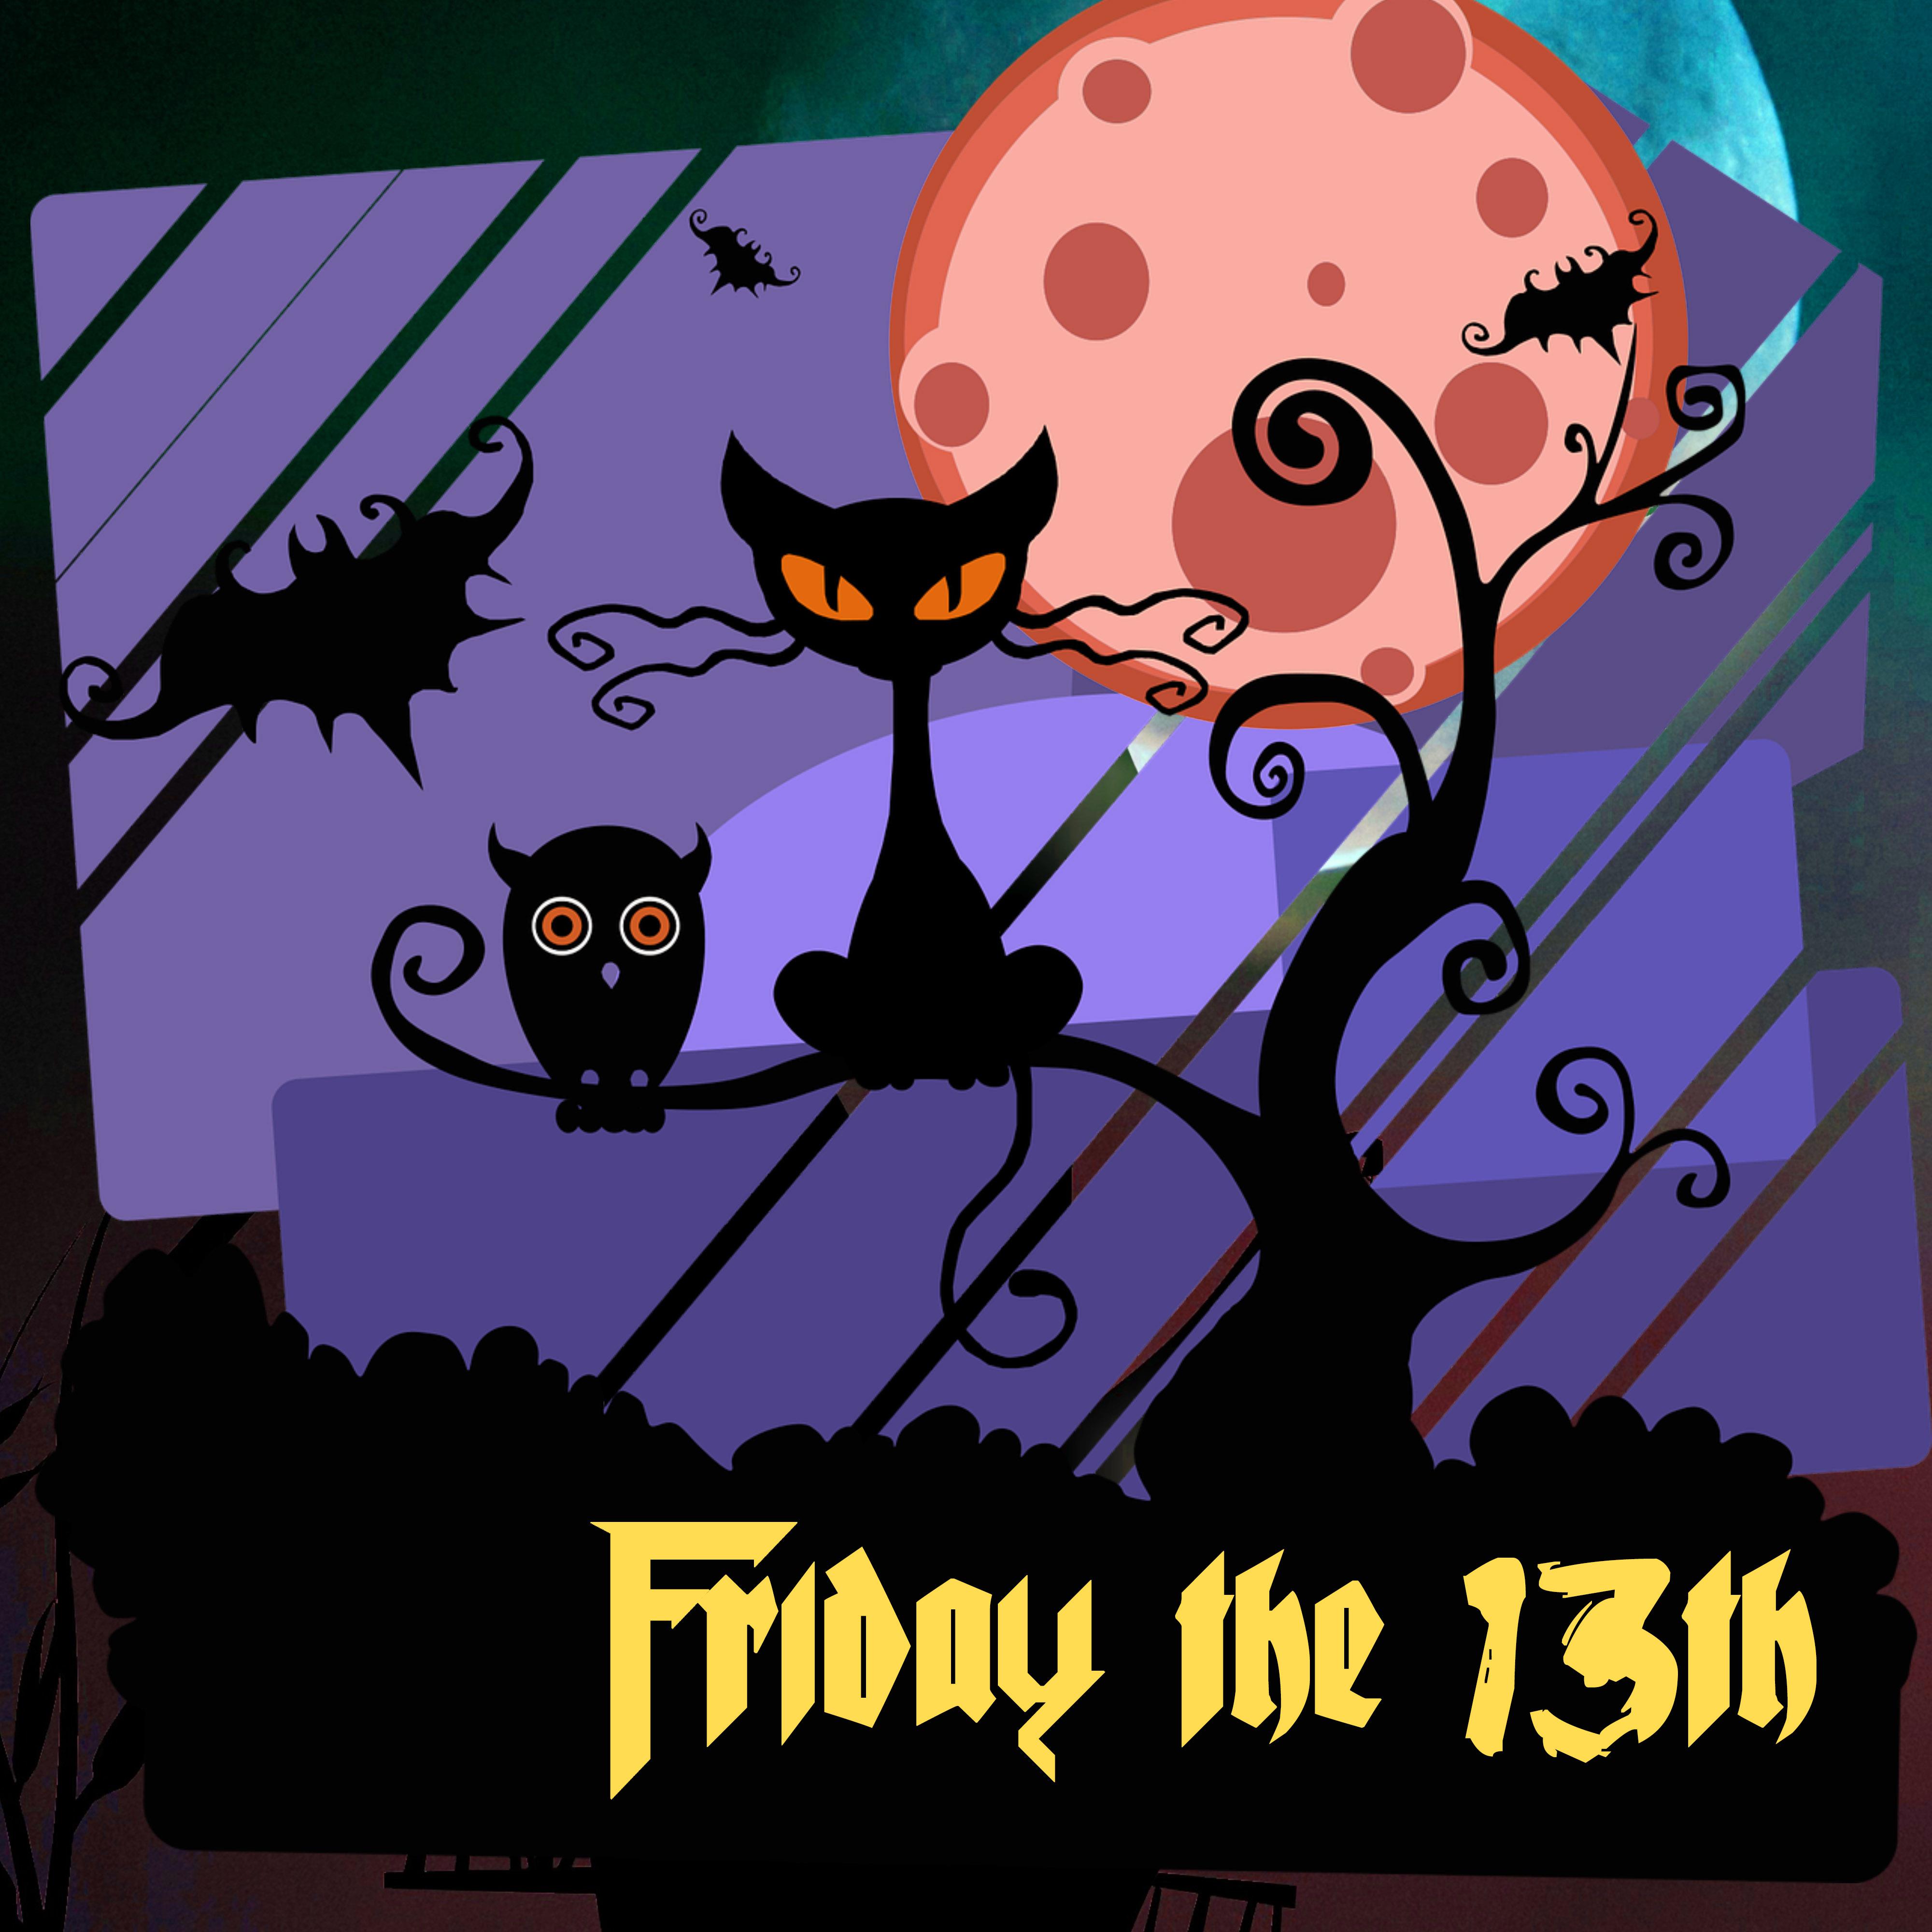 Friday the 13th - Horror Music for Halloween Party, Dark Scary Stories and Jump Scares